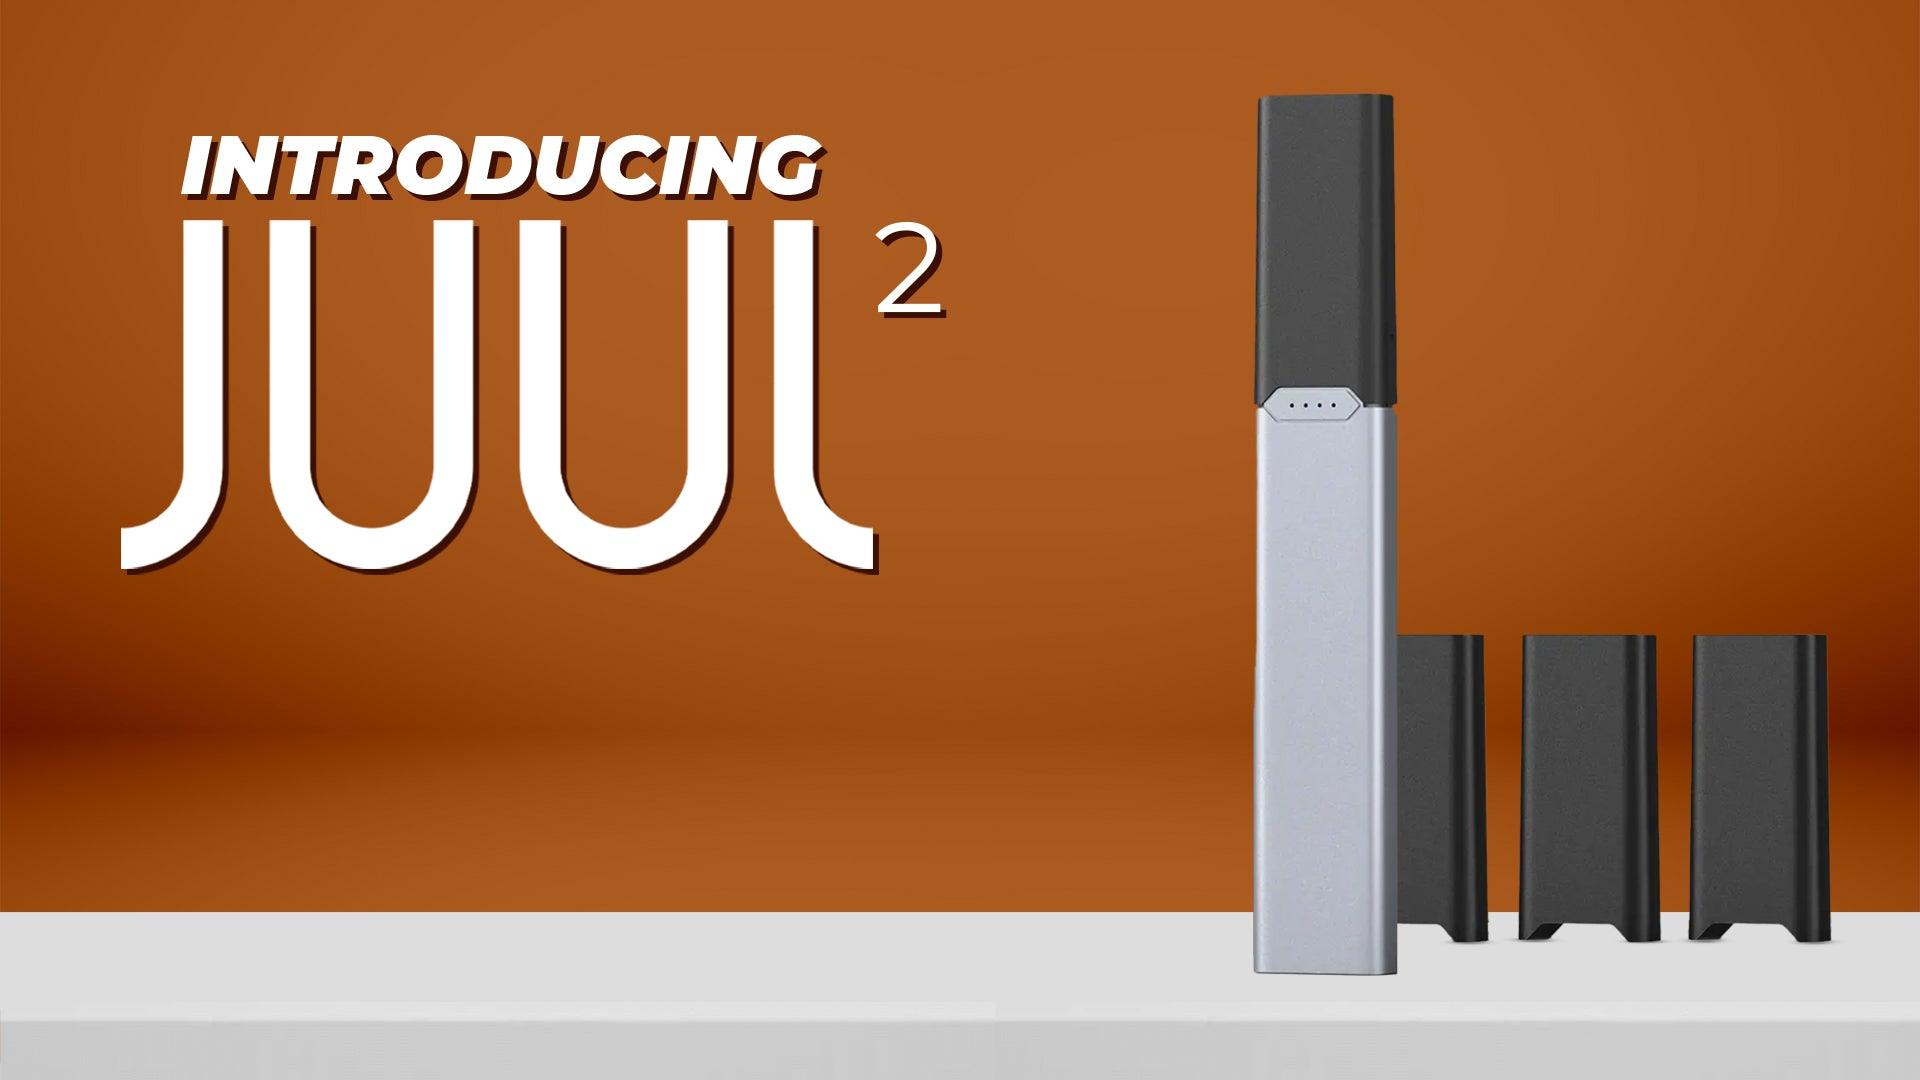 Introducing JUUL 2 - Brand:Juul, Category:Vape Kits, Sub Category:Prefilled Pods